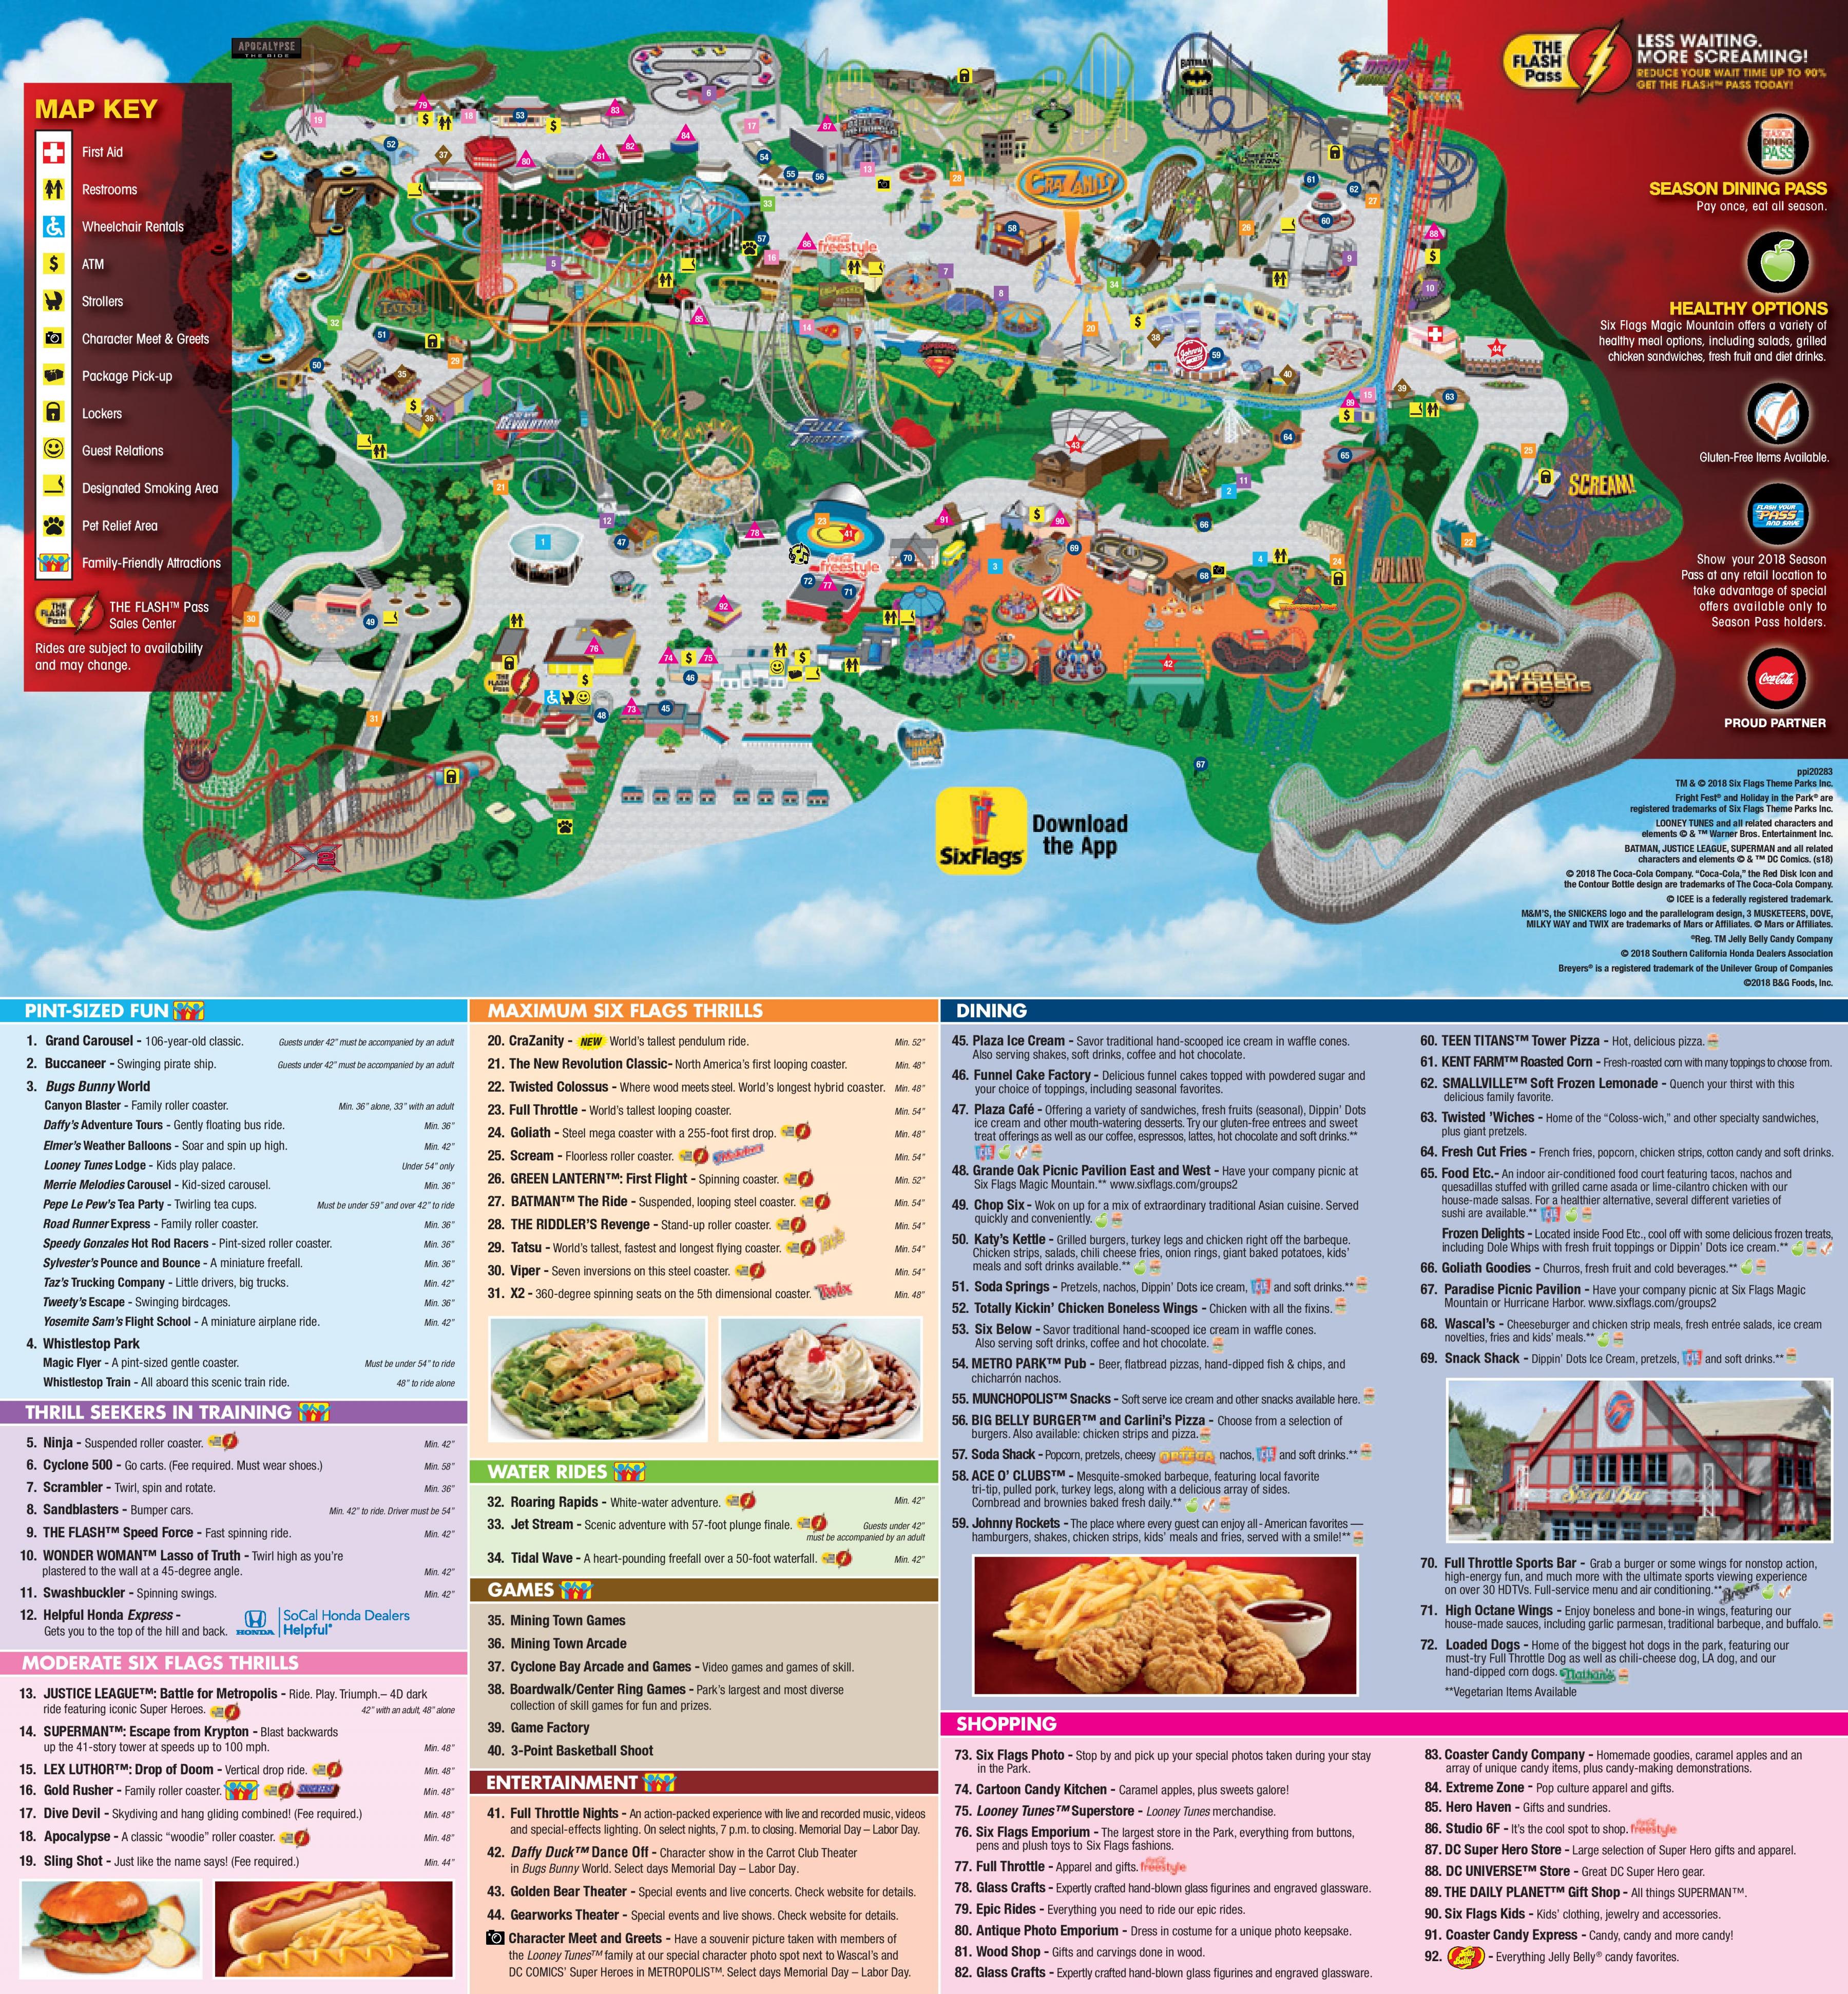 Six flags Los Angeles map - Six flags map Los Angeles (California - USA)